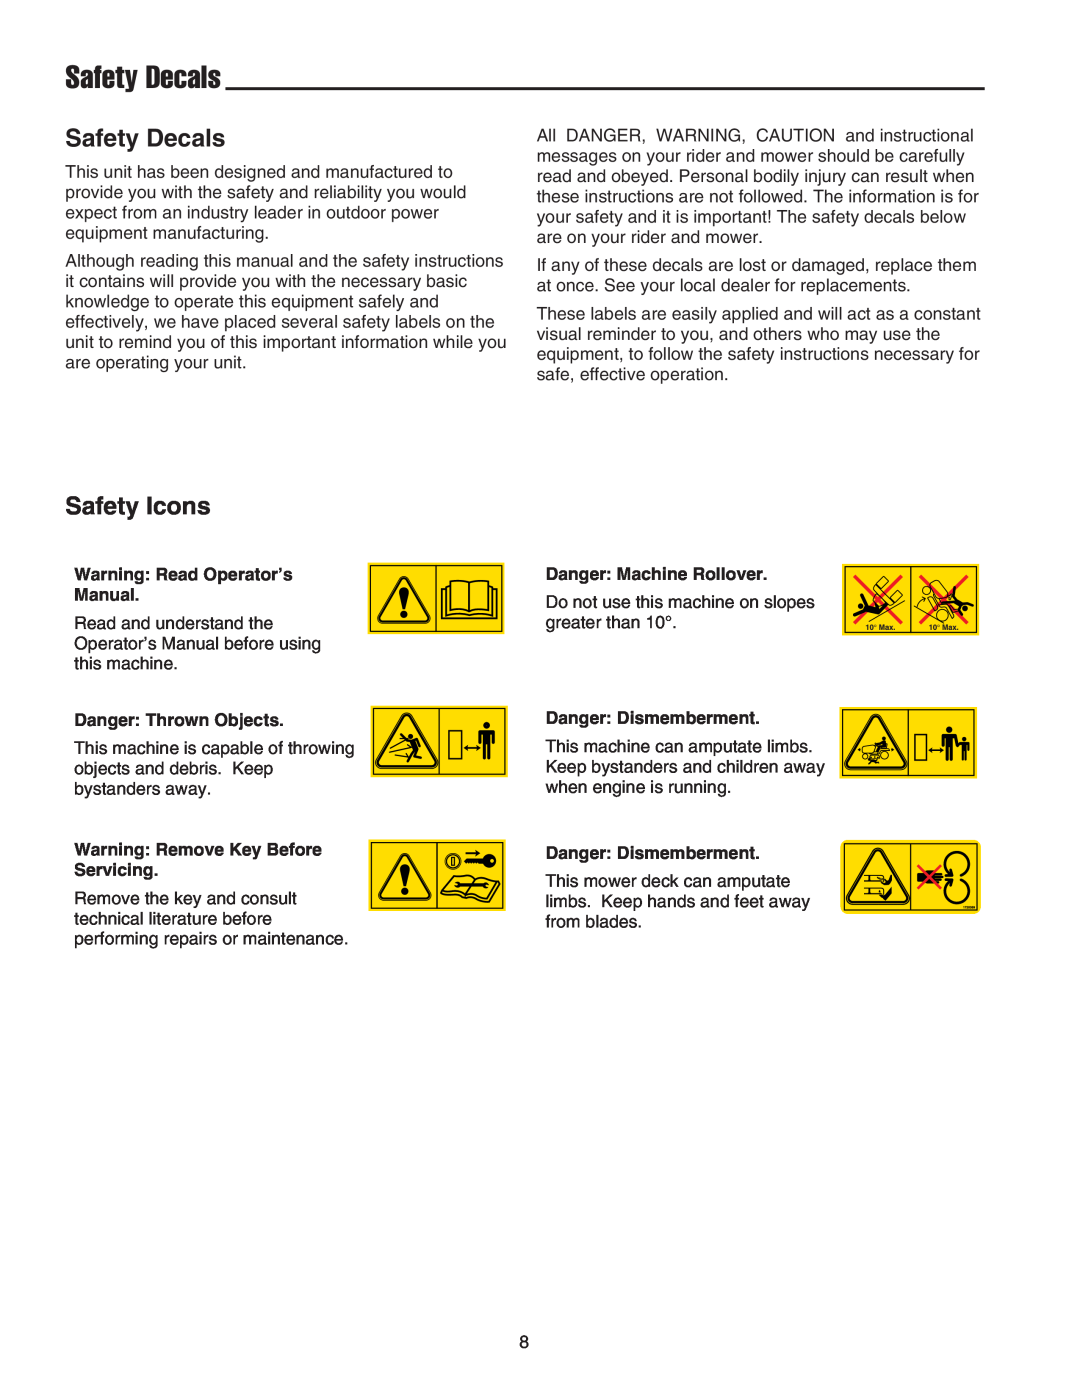 Snapper LT-200 manual Safety Decals, Safety Icons 